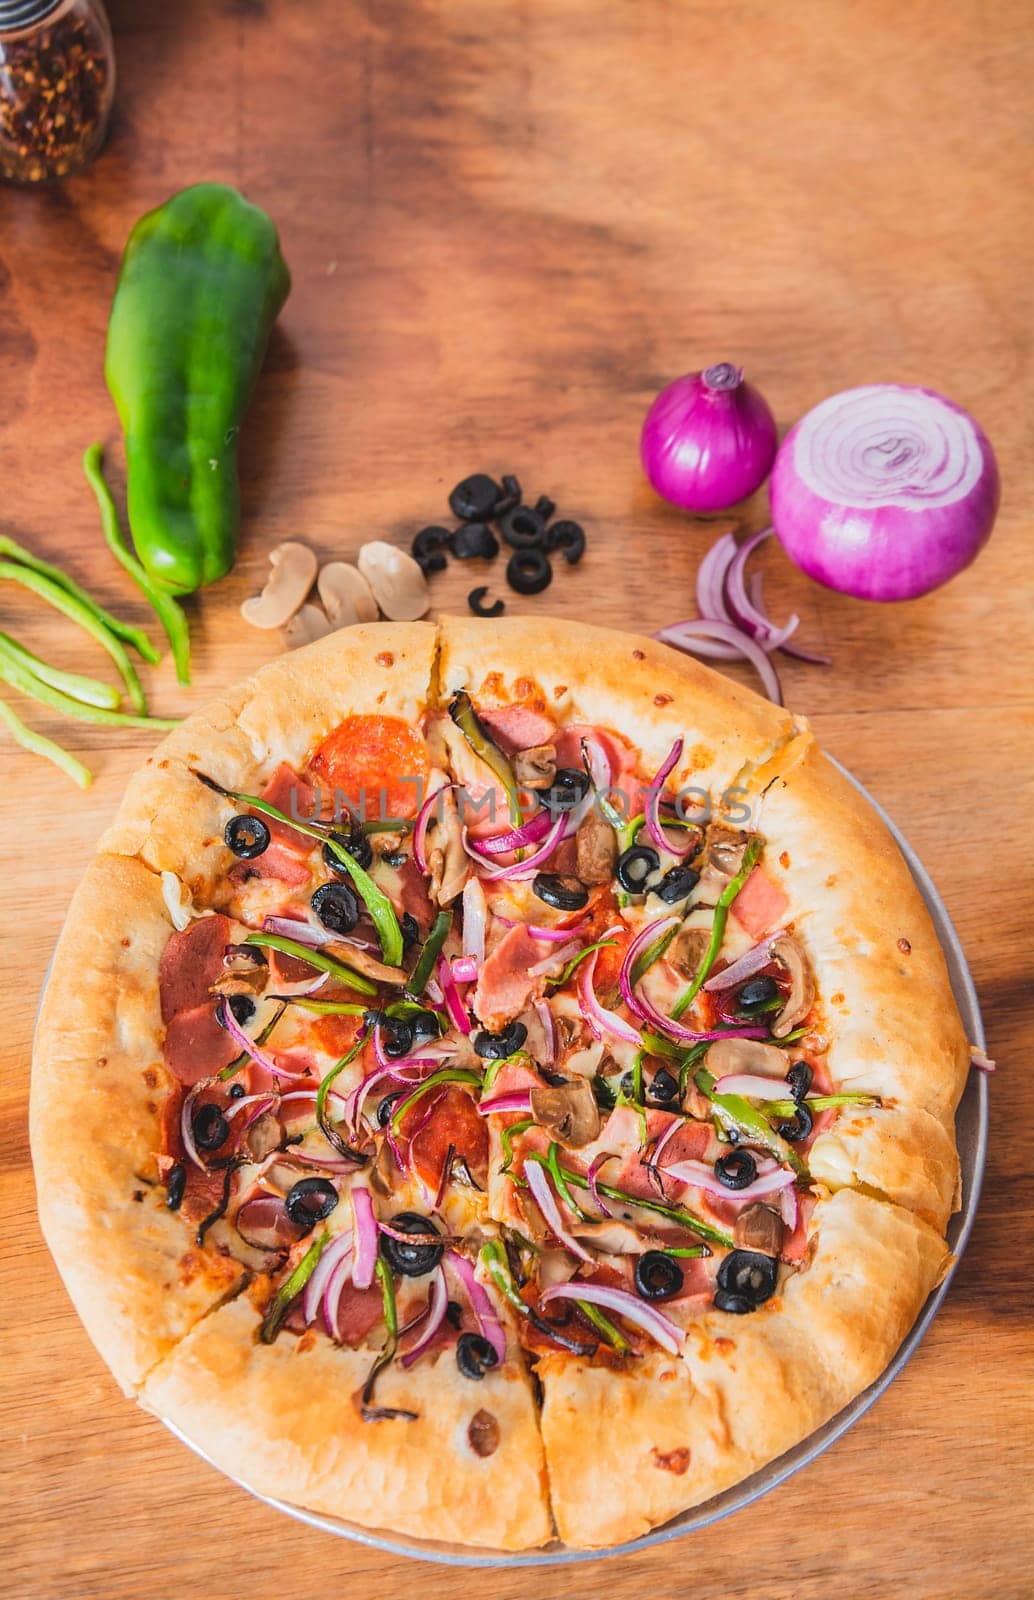 Top view of supreme pizza with olives and vegetables on wooden table. Delicious supreme pizza with vegetables on wooden background by isaiphoto